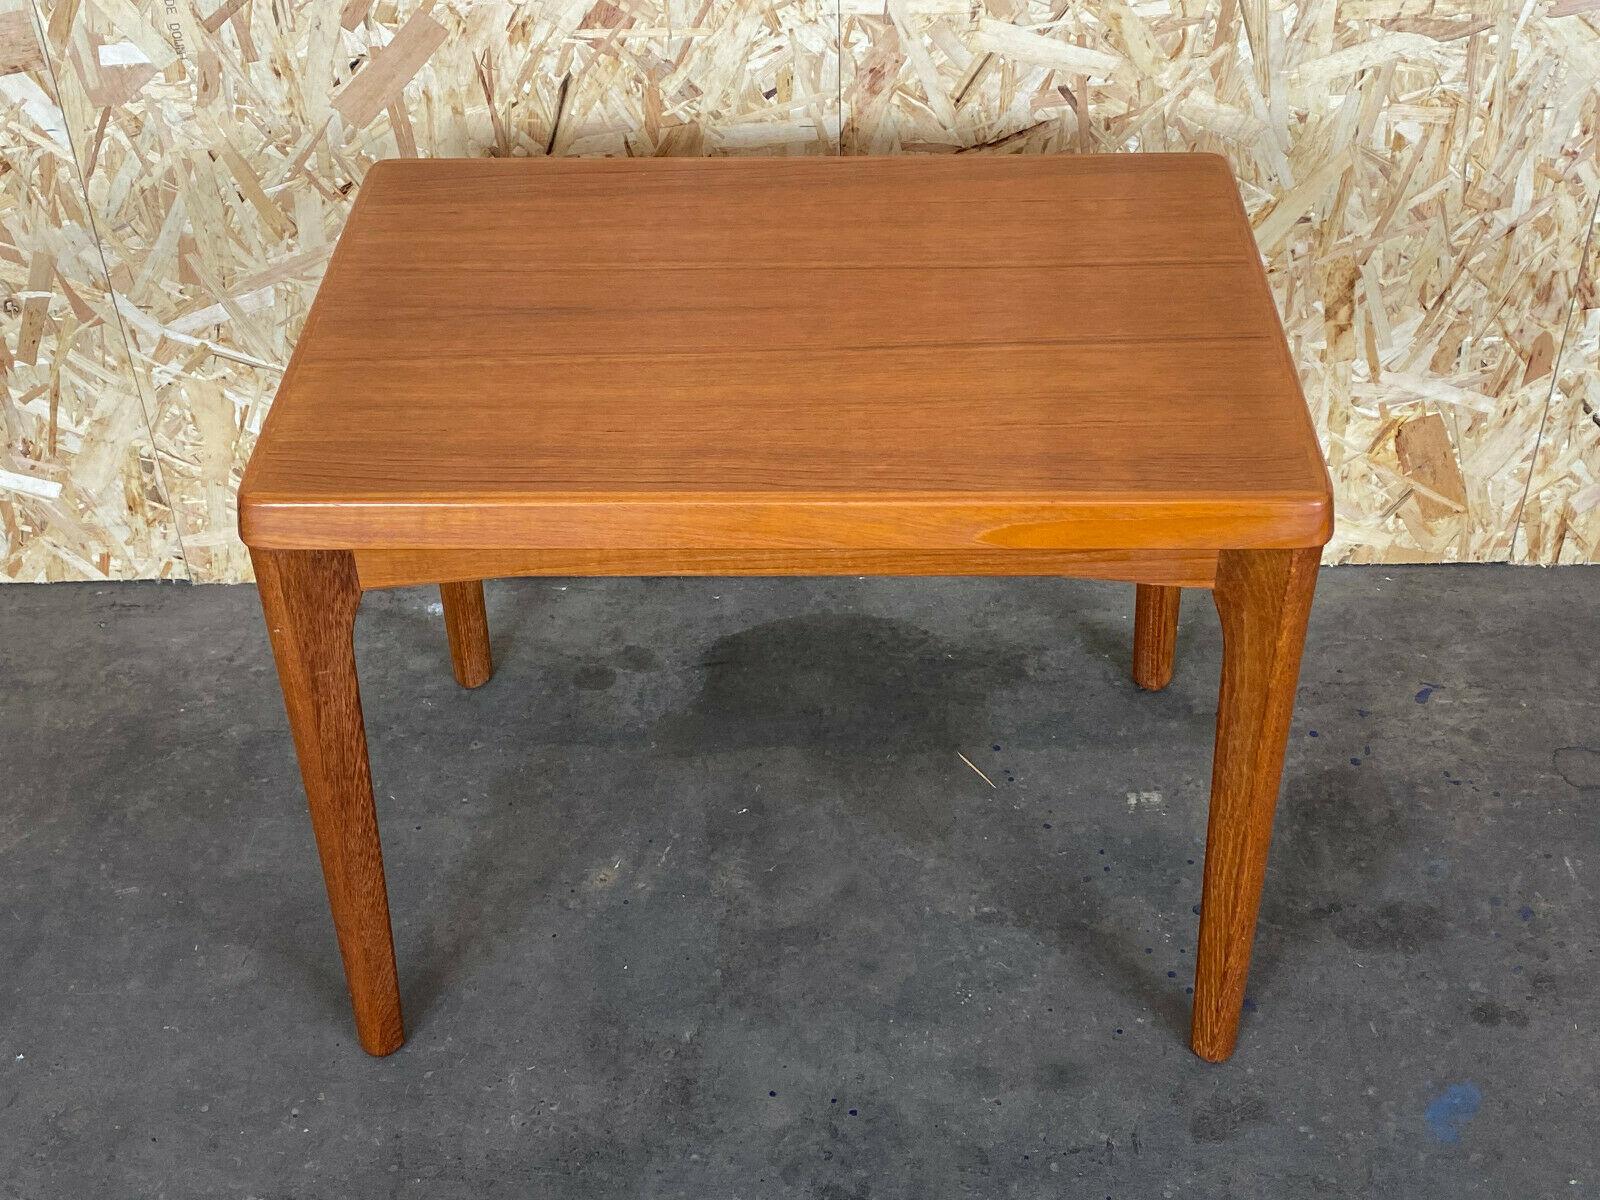 60's side table